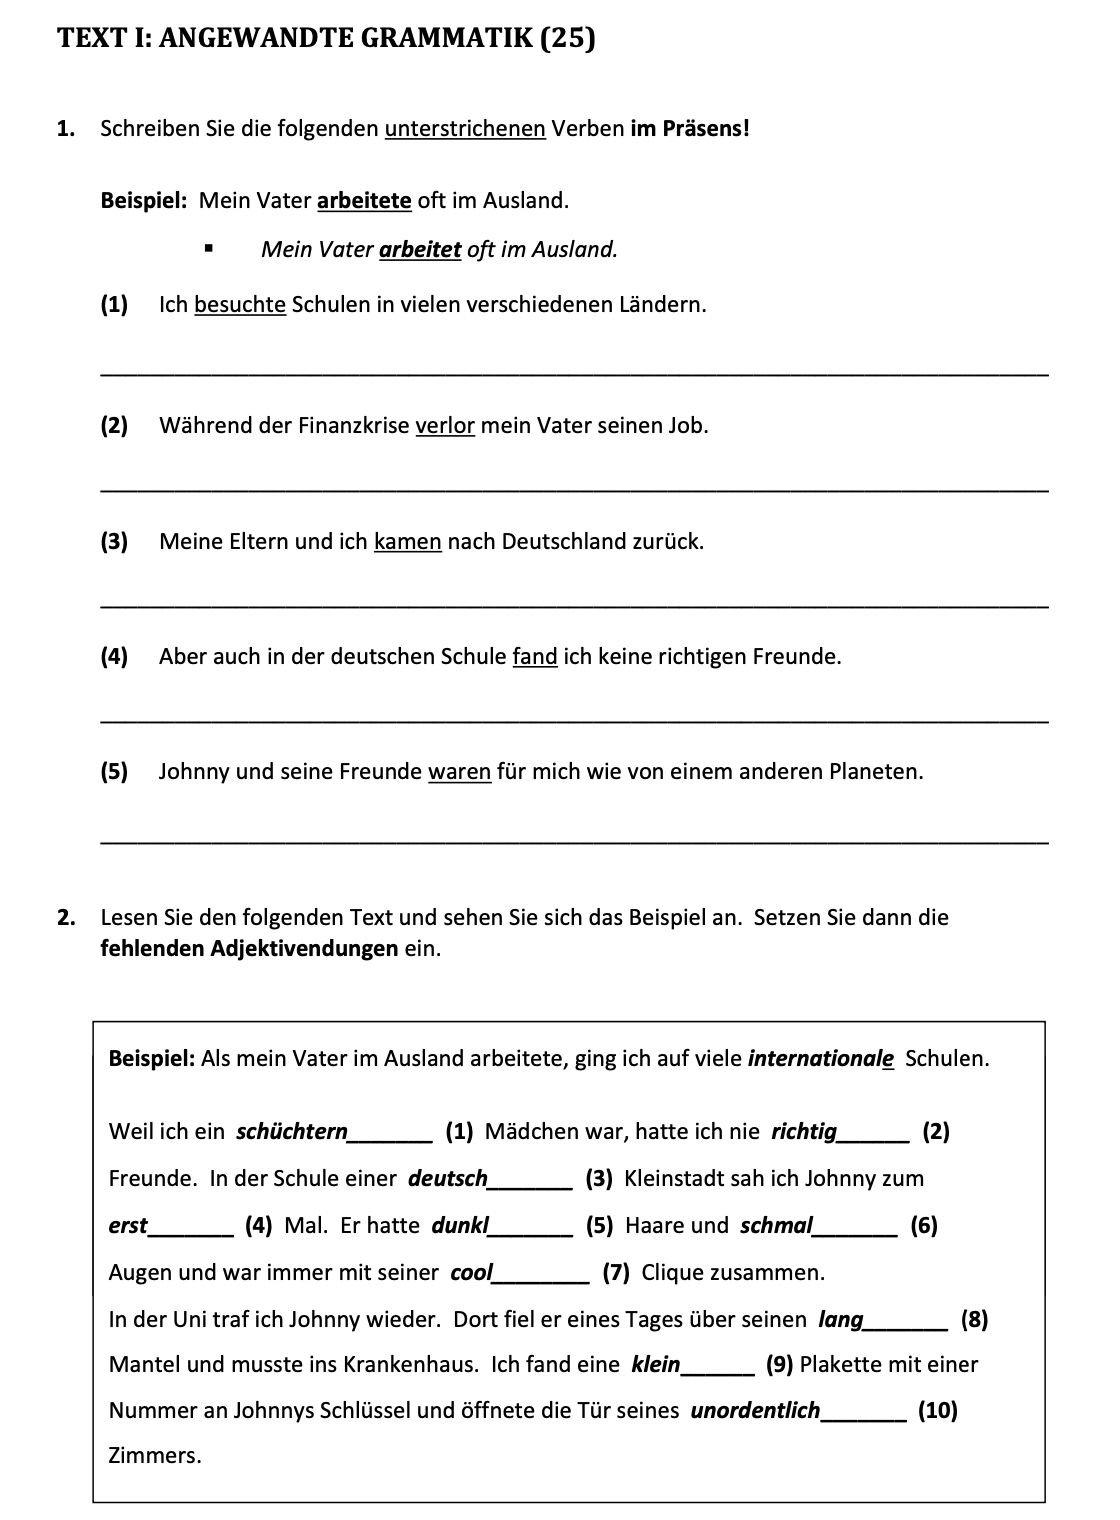 an image of the question 2019 Text I Angewandte Grammatik which is about the topic grammatik and the subject is Leaving Certificate german